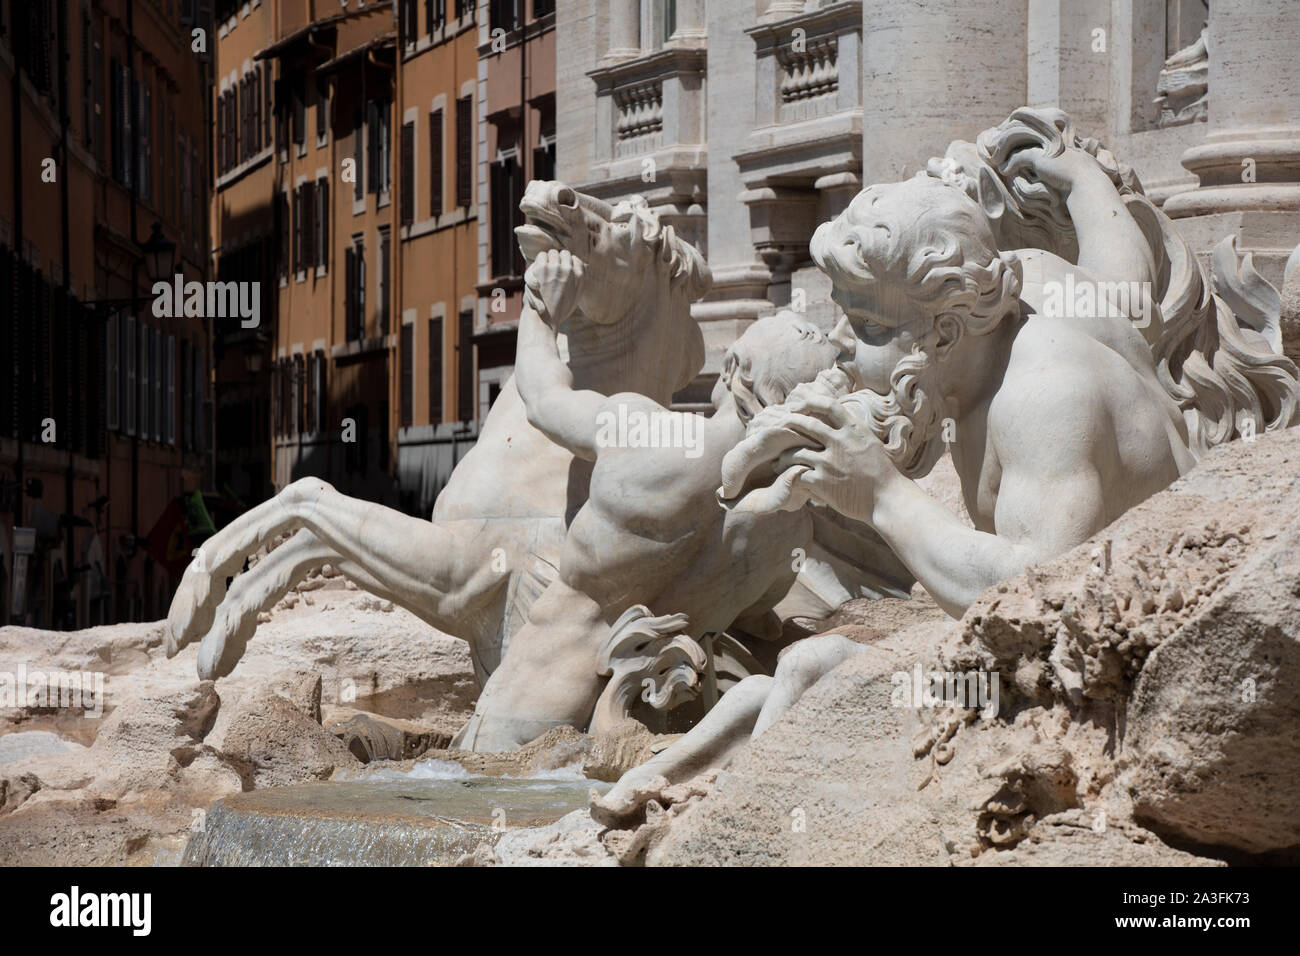 Statues on the Trevi Fountain in Rome, showing the tritons and sea horses struggling on the rocks. In the background are some traditional roman houses Stock Photo